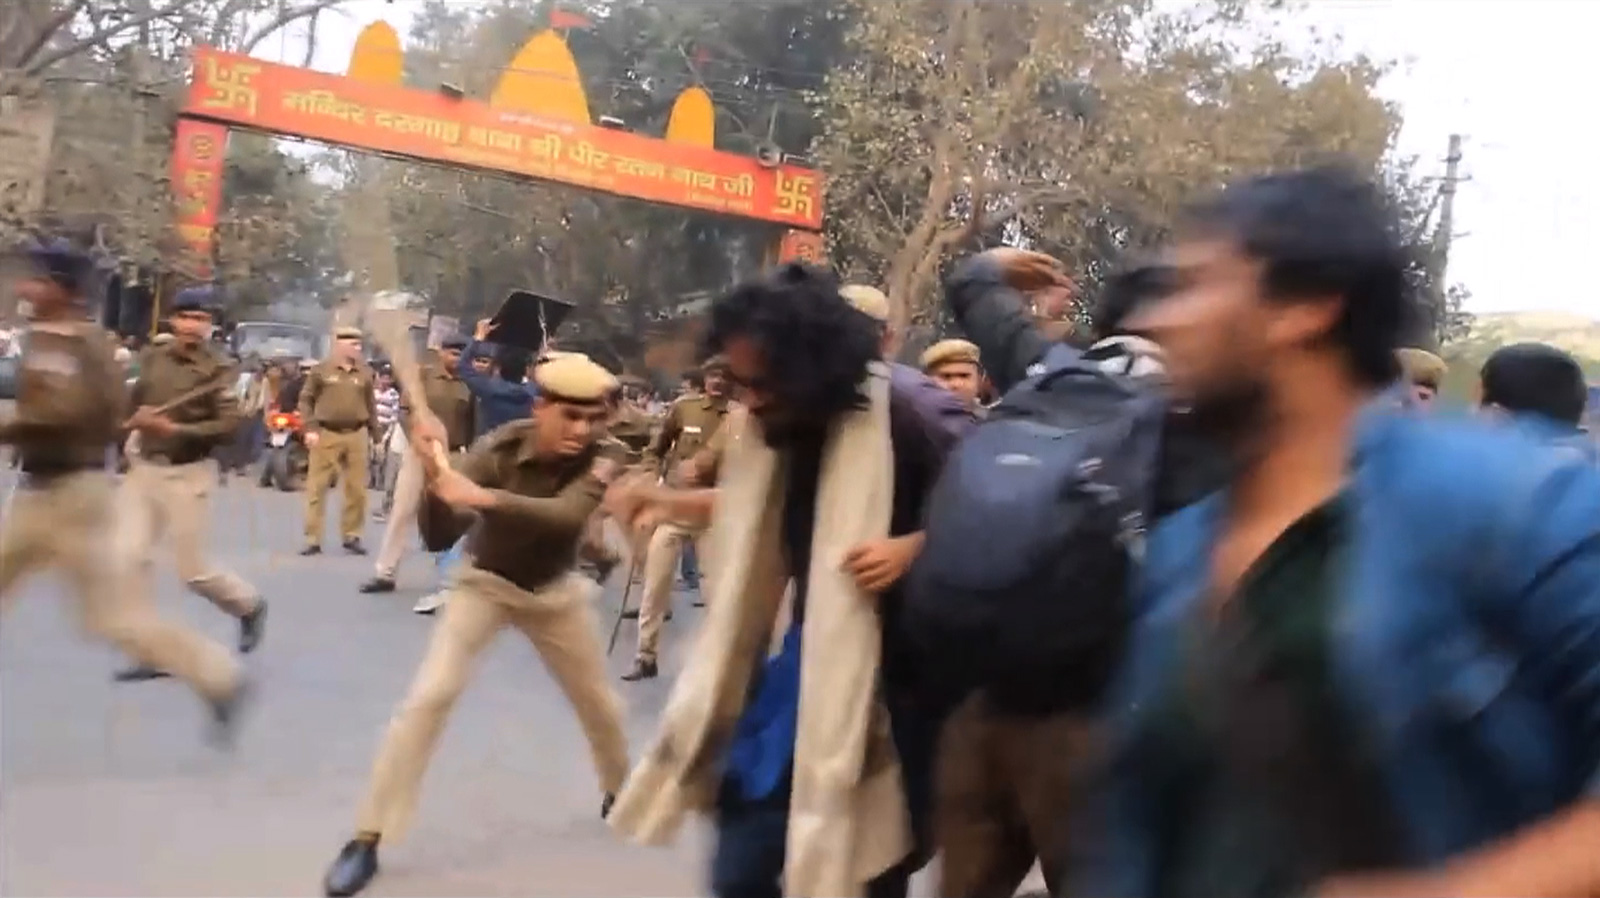 A still from Vivek showing police beating students who were protesting in front of the RSS headquarters in Delhi following the induced suicide of the scholar Rohith Vemula